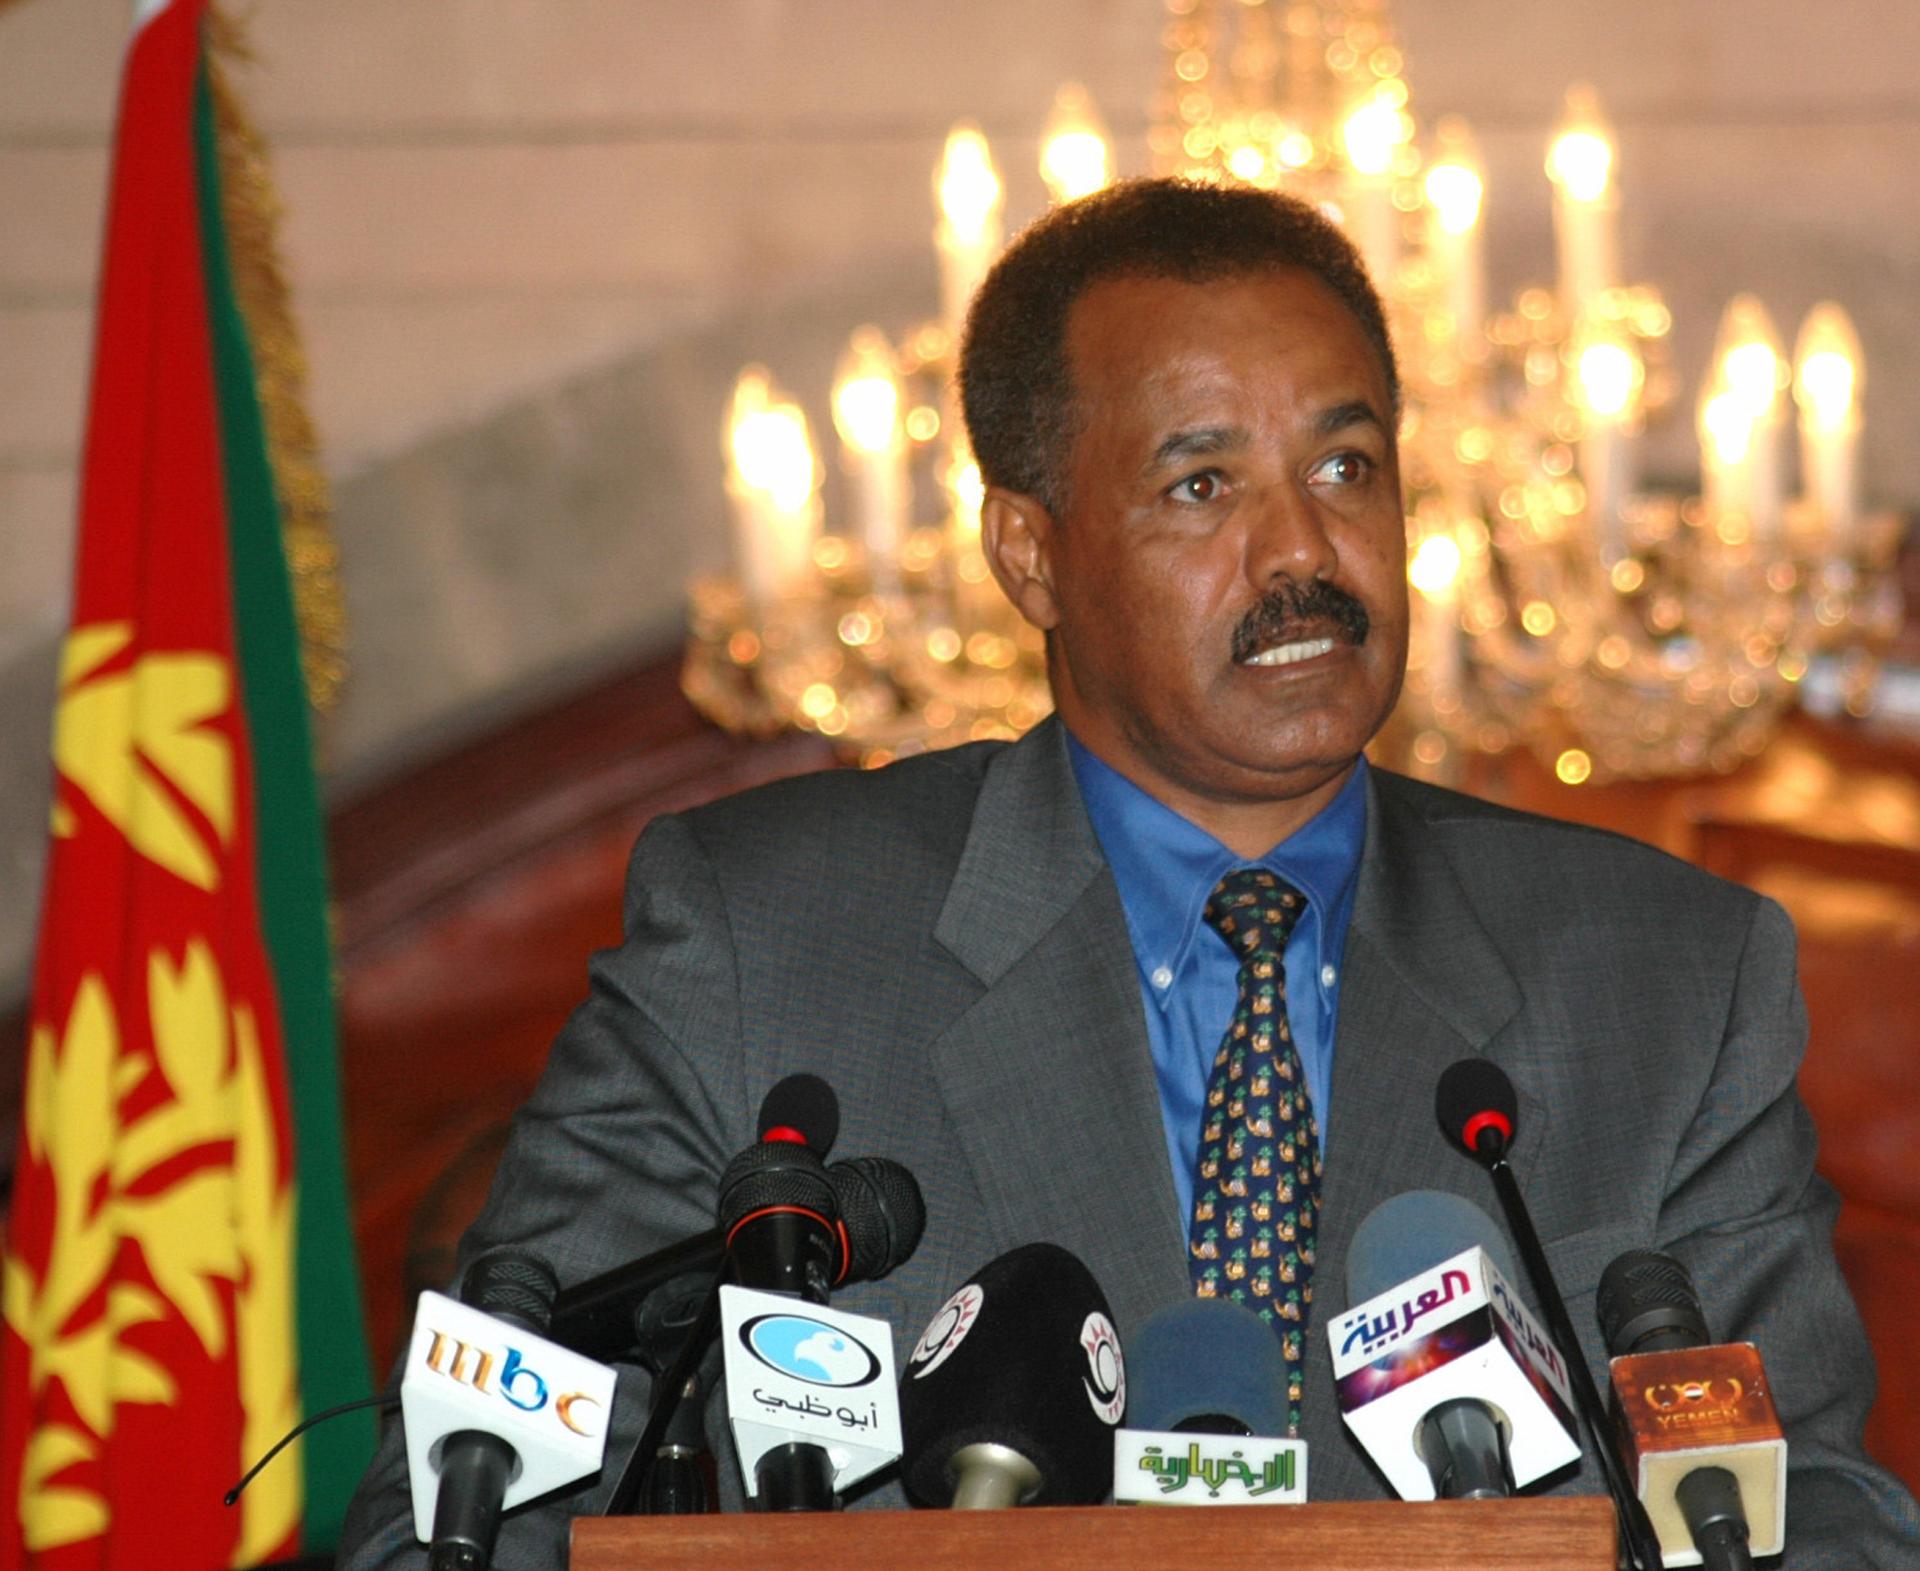 Eritrean President Isaias Afwerki was left off the invitation list to the US-Africa Leaders Summit in Washington, DC.